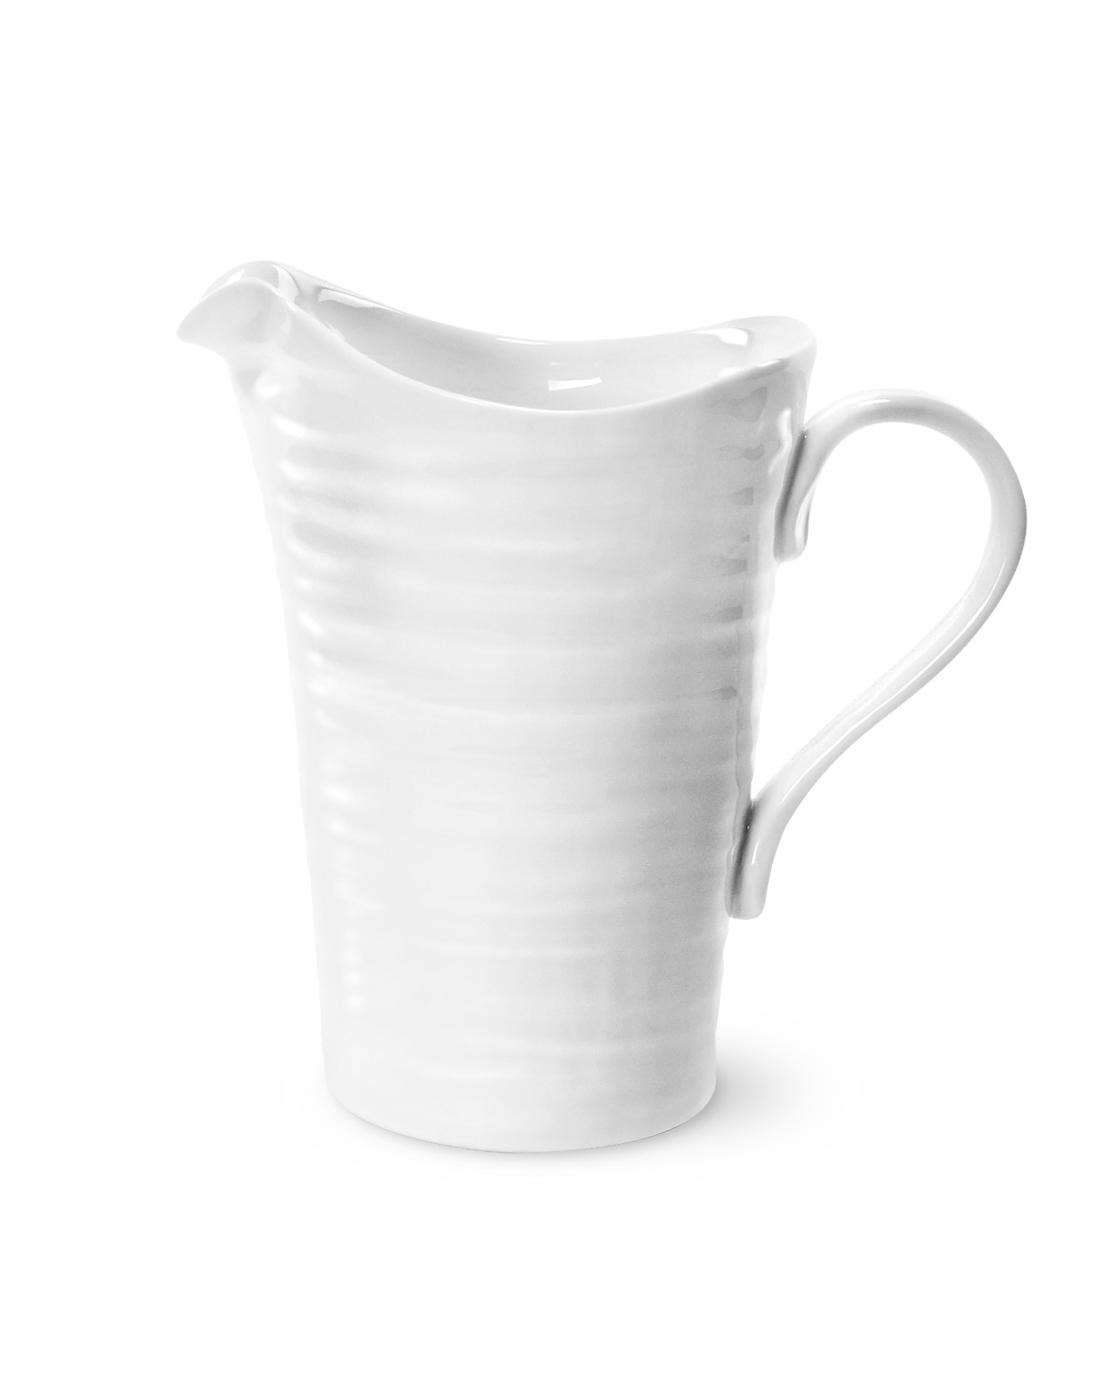 Sophie Conran White Large Pitcher